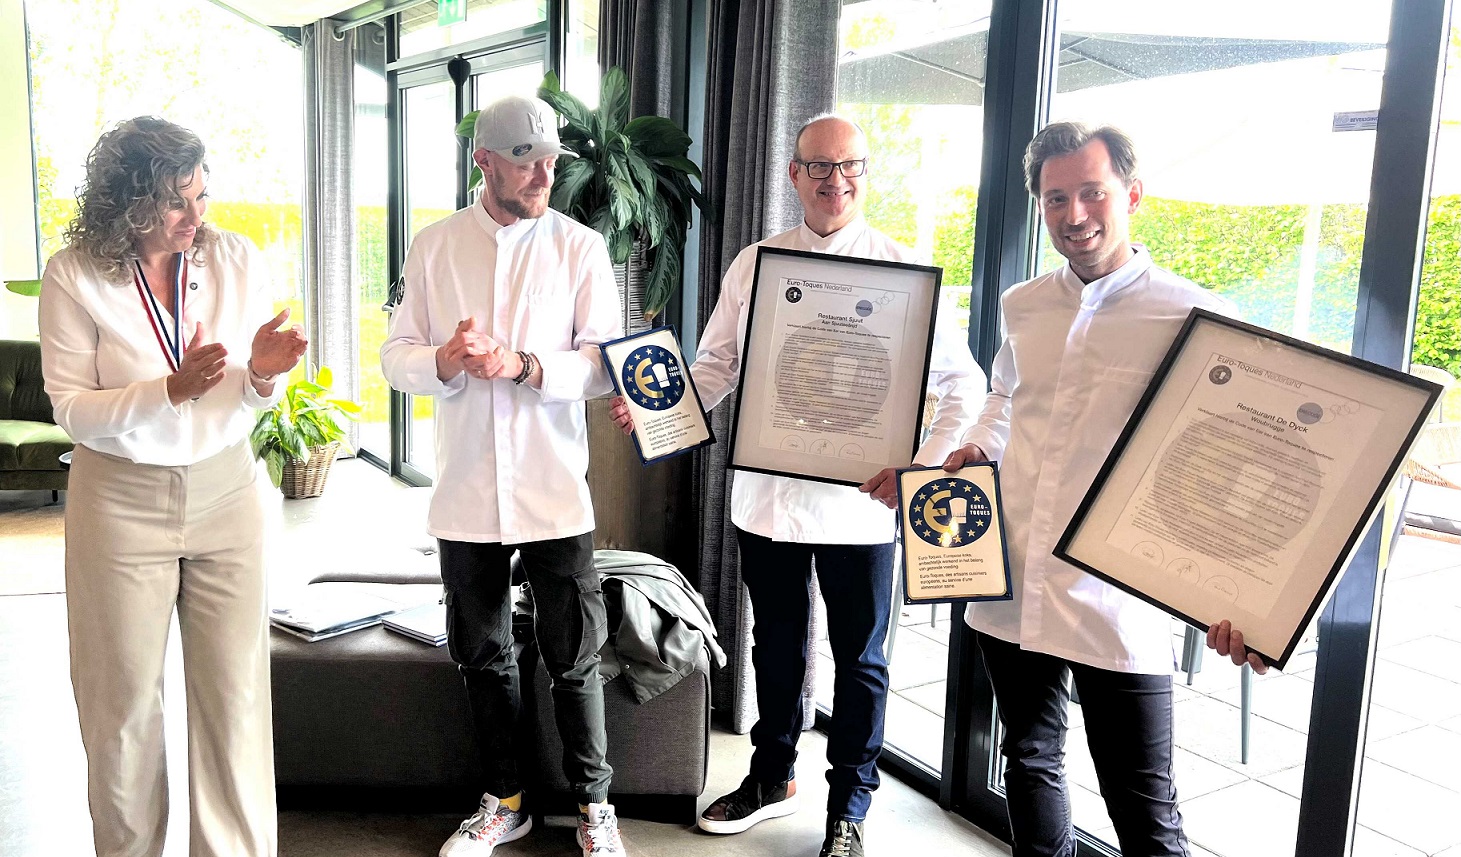 Unieke Euro-Toques lunch van drie Groene Michelin Sterrenchefs groot succes